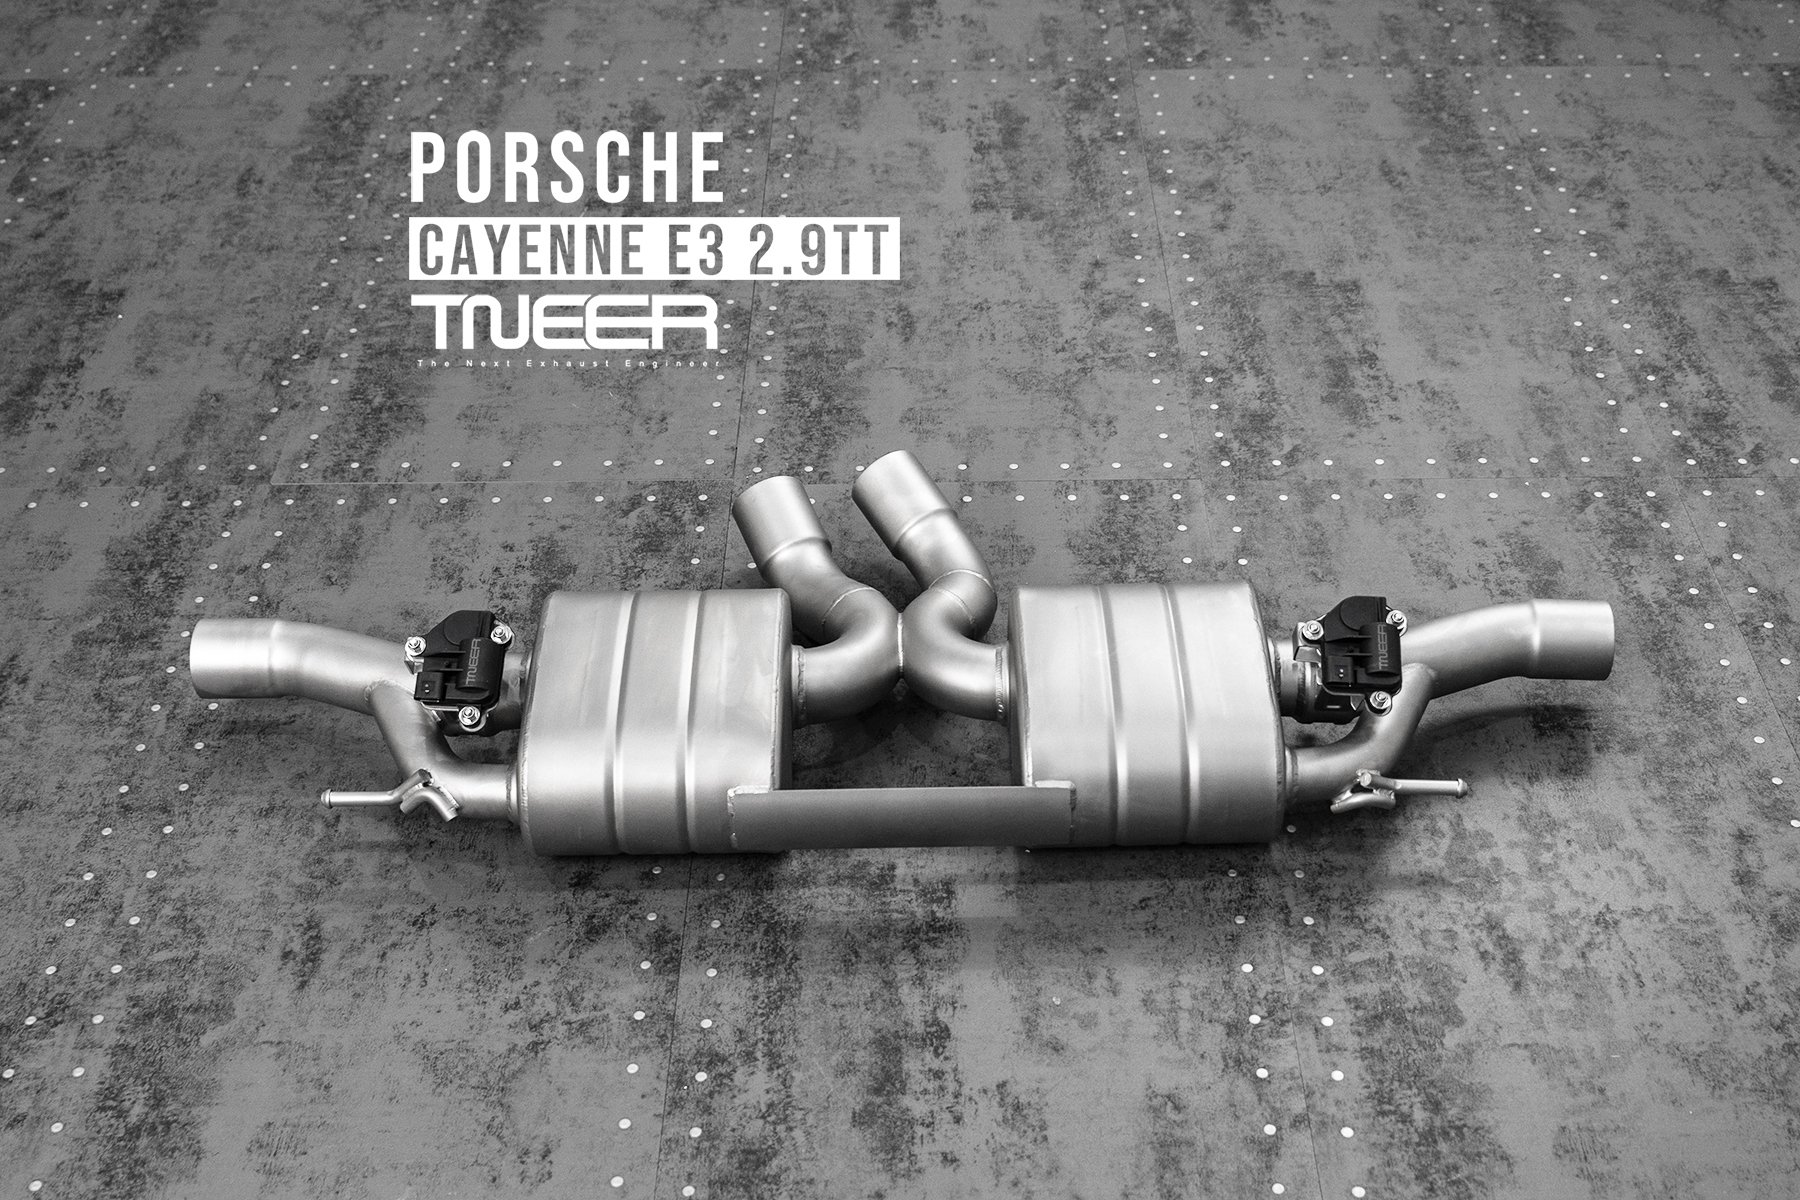 Porsche Cayenne S/Coupe S (E3) 2.9TT TNEER Performance Downpipes